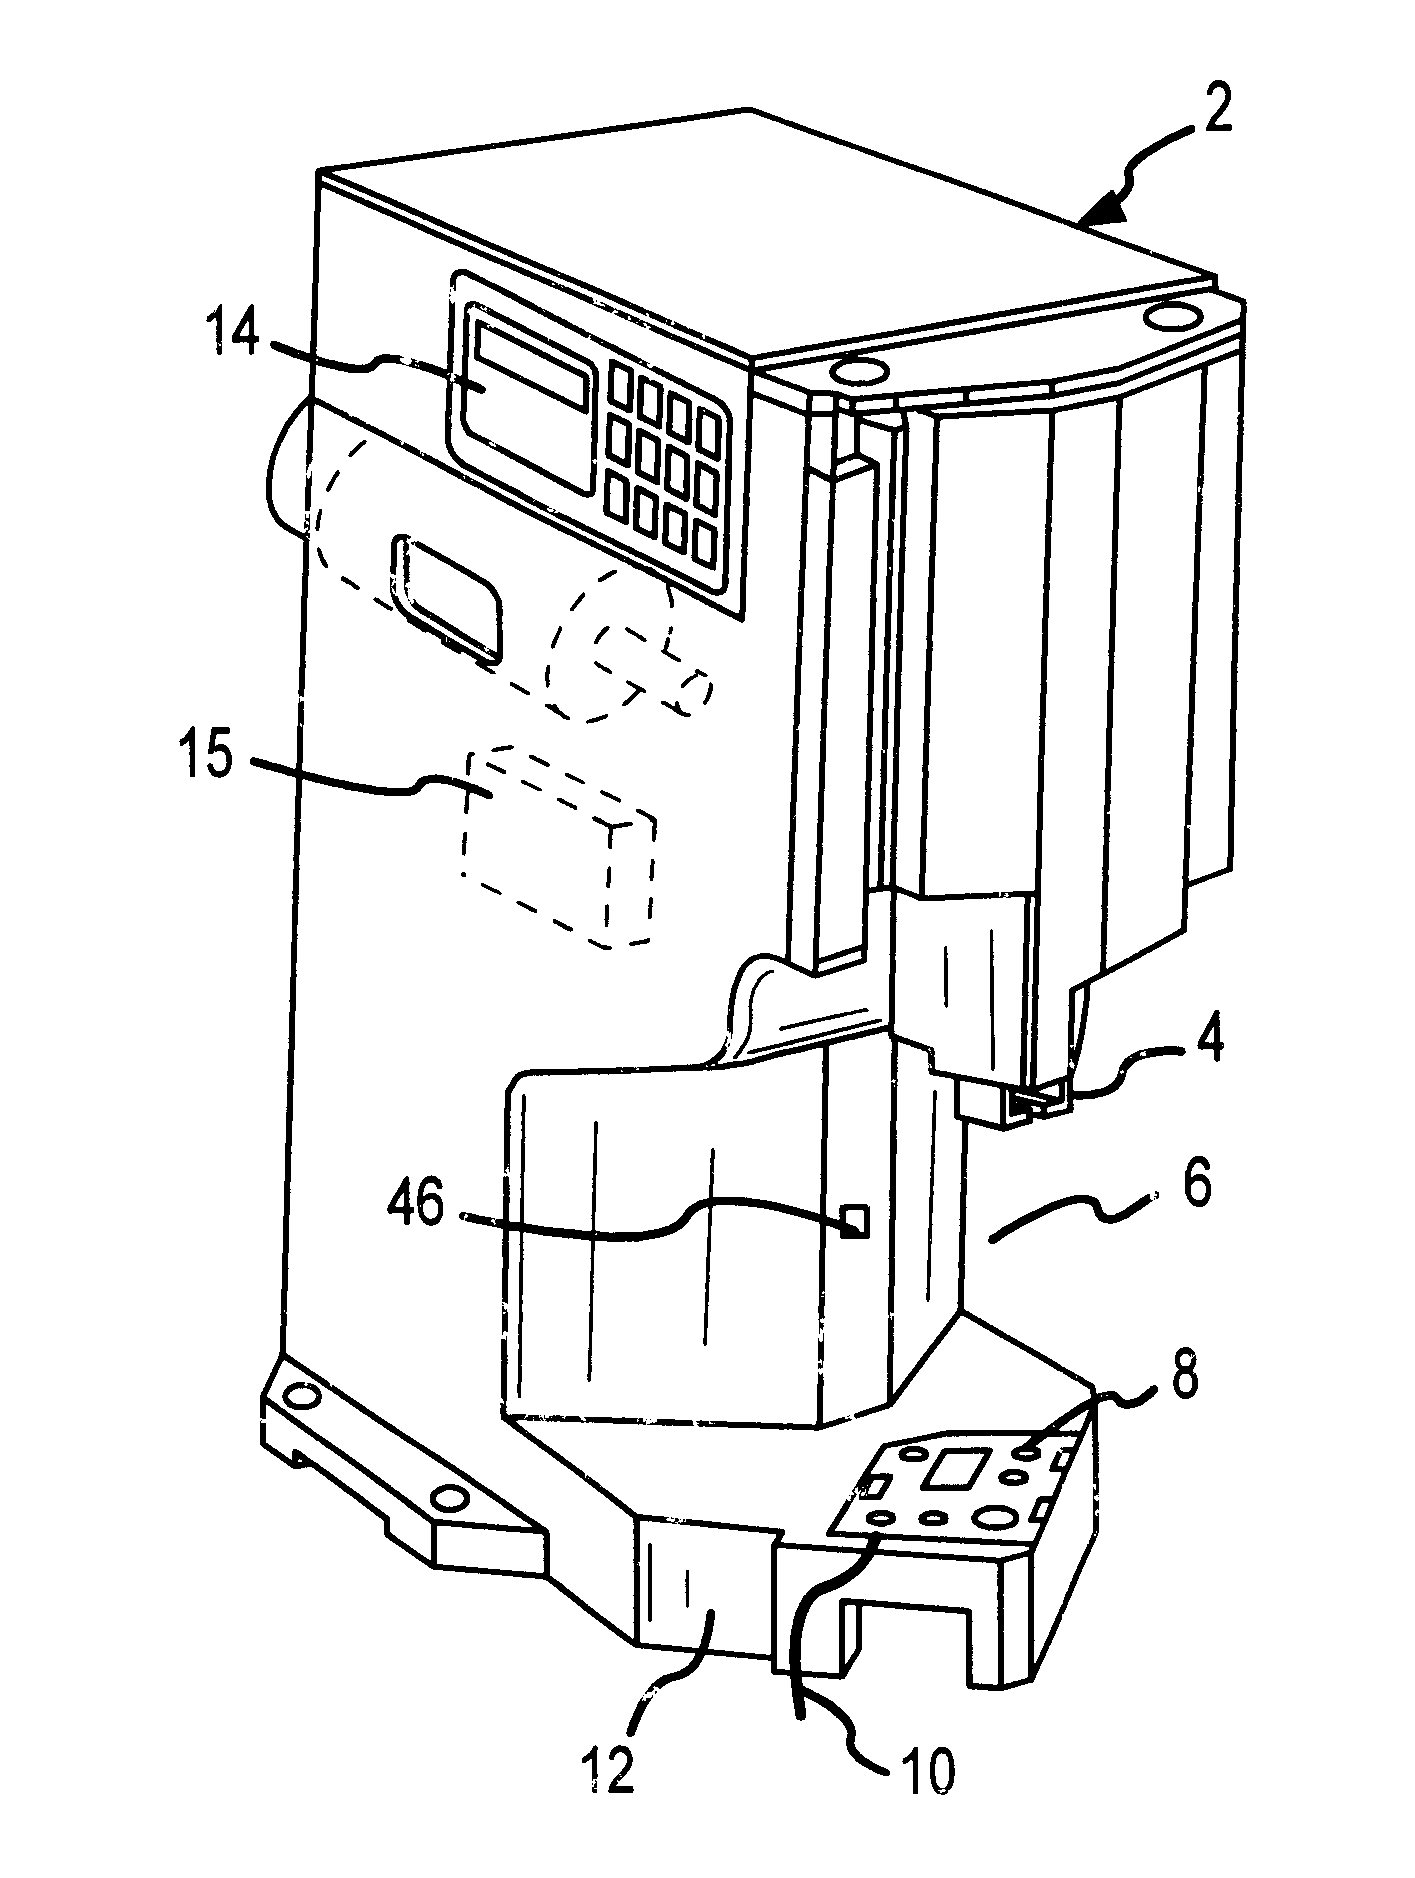 Method for quality assurance of crimp connections produced by a crimping device and crimping tool and crimping device therefor